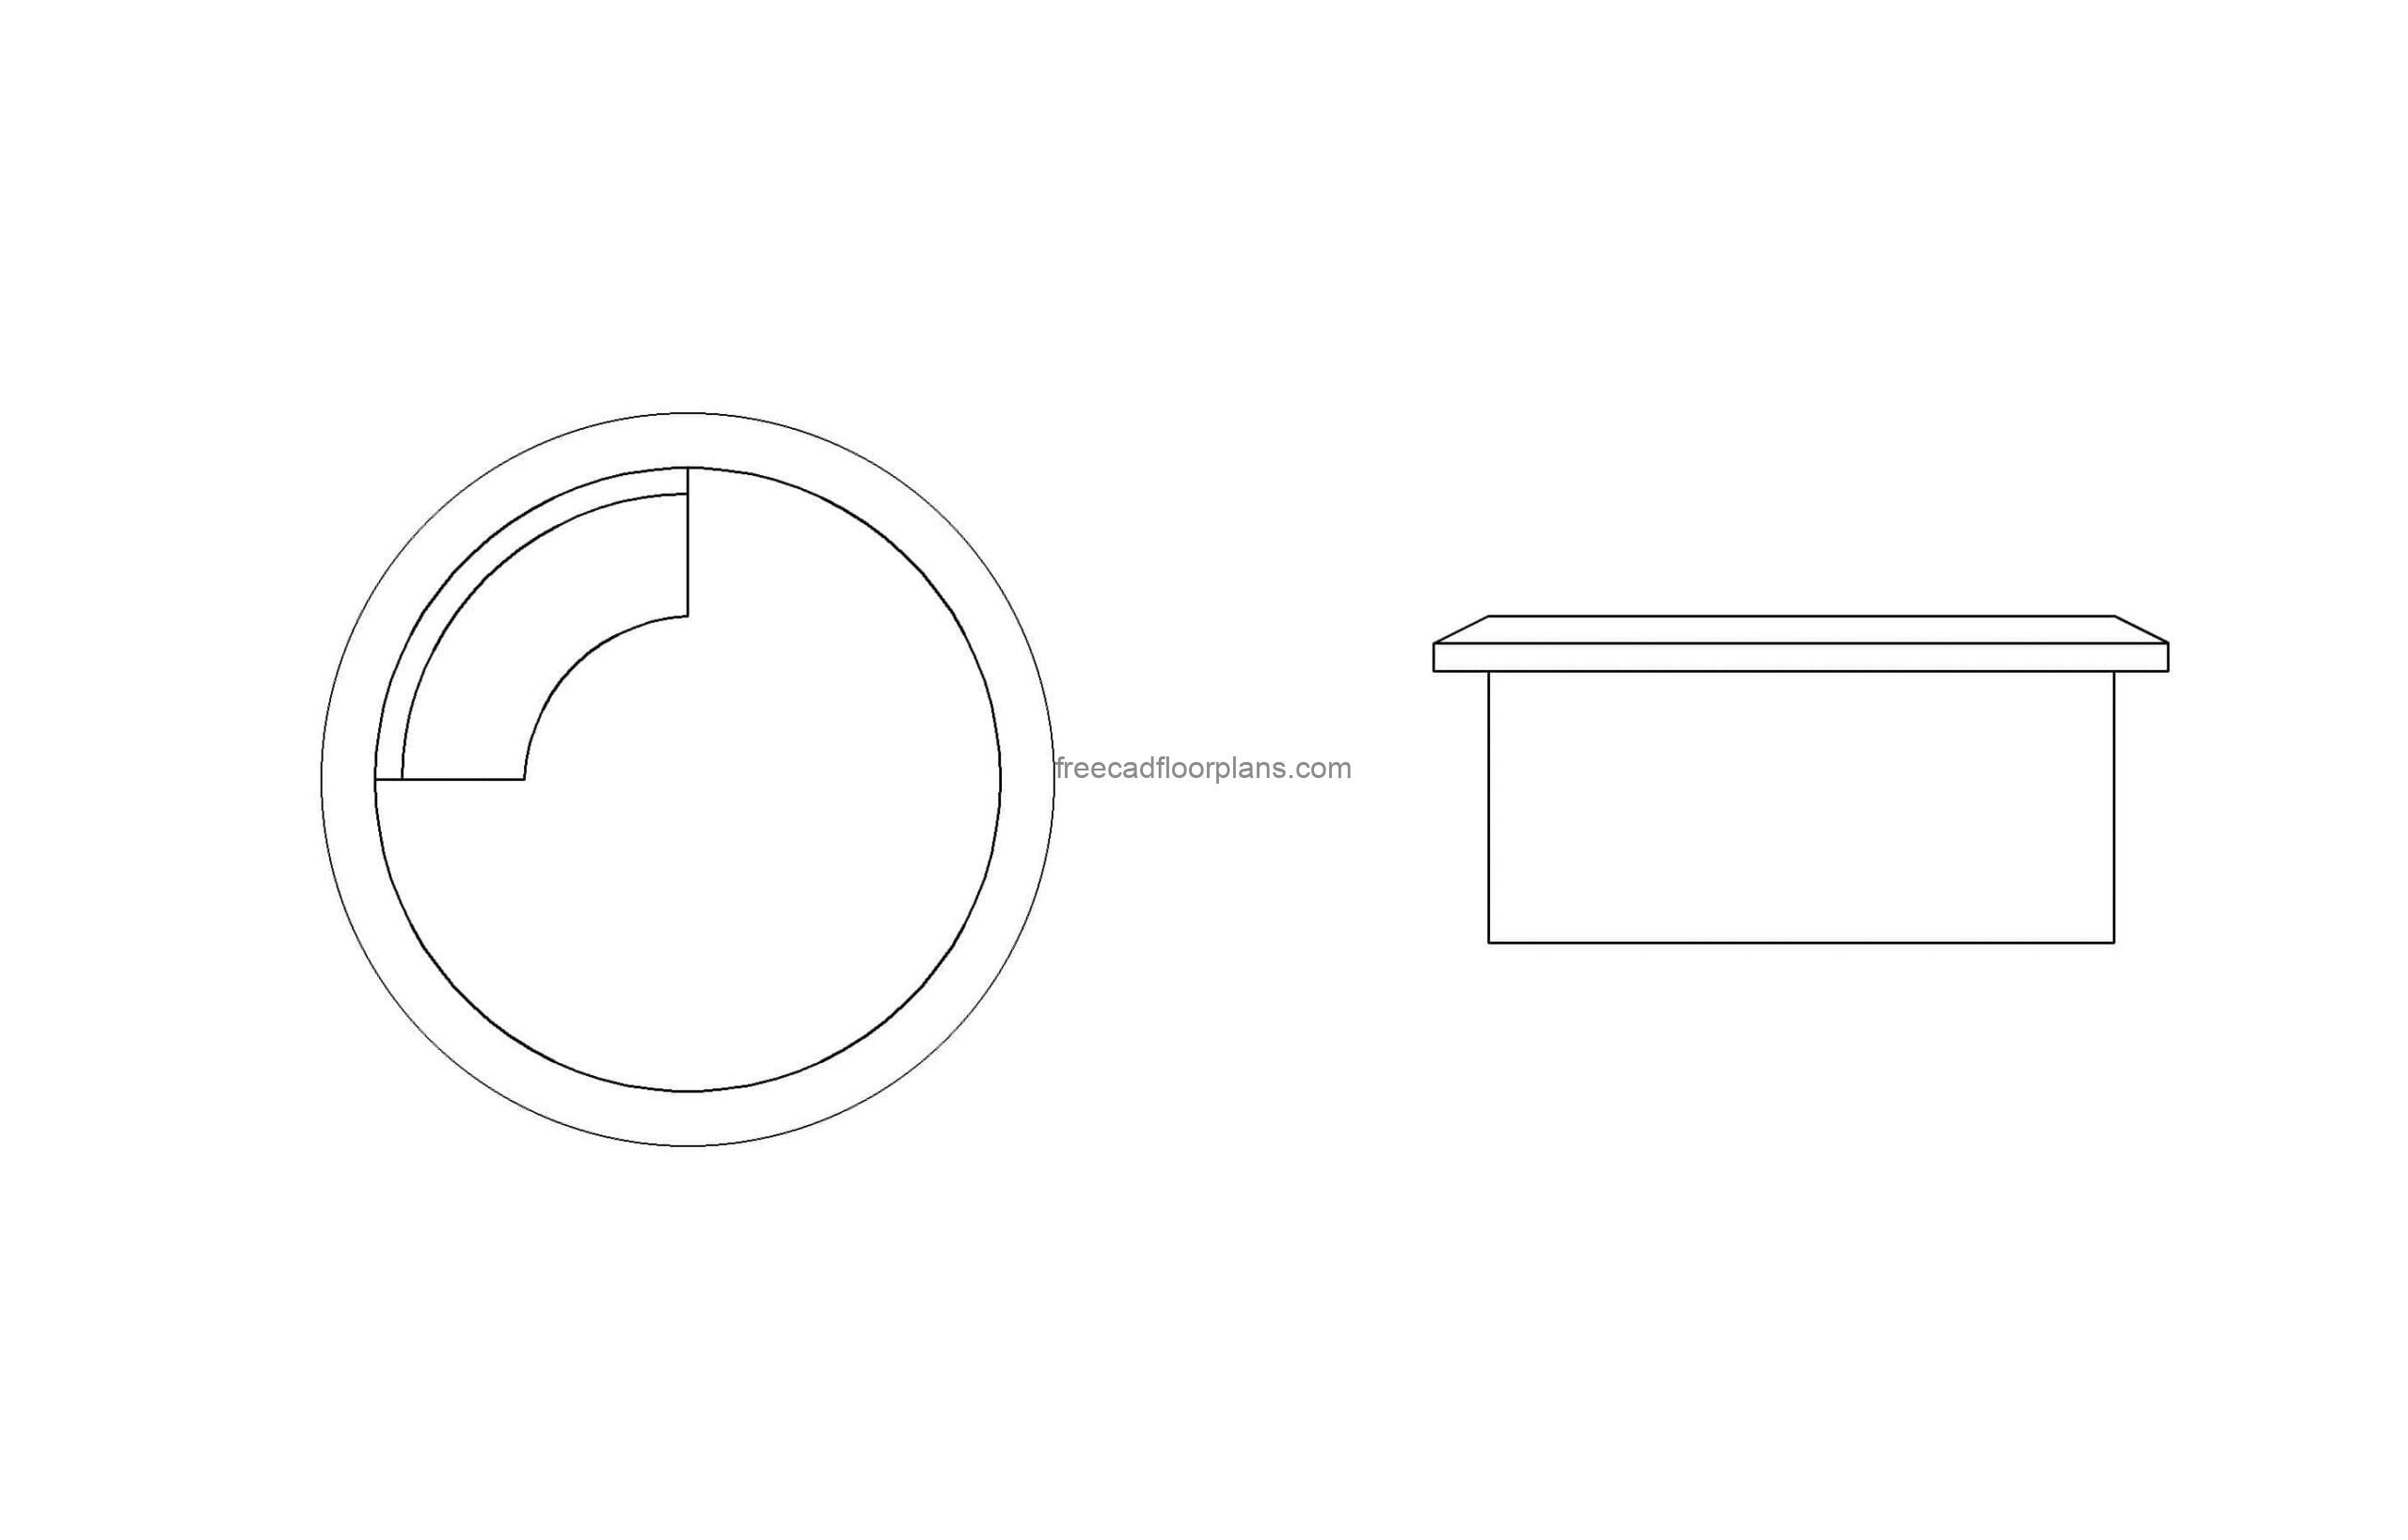 desk cable grommet autocad drawing, 2d plan and elevation views, dwg file for free download